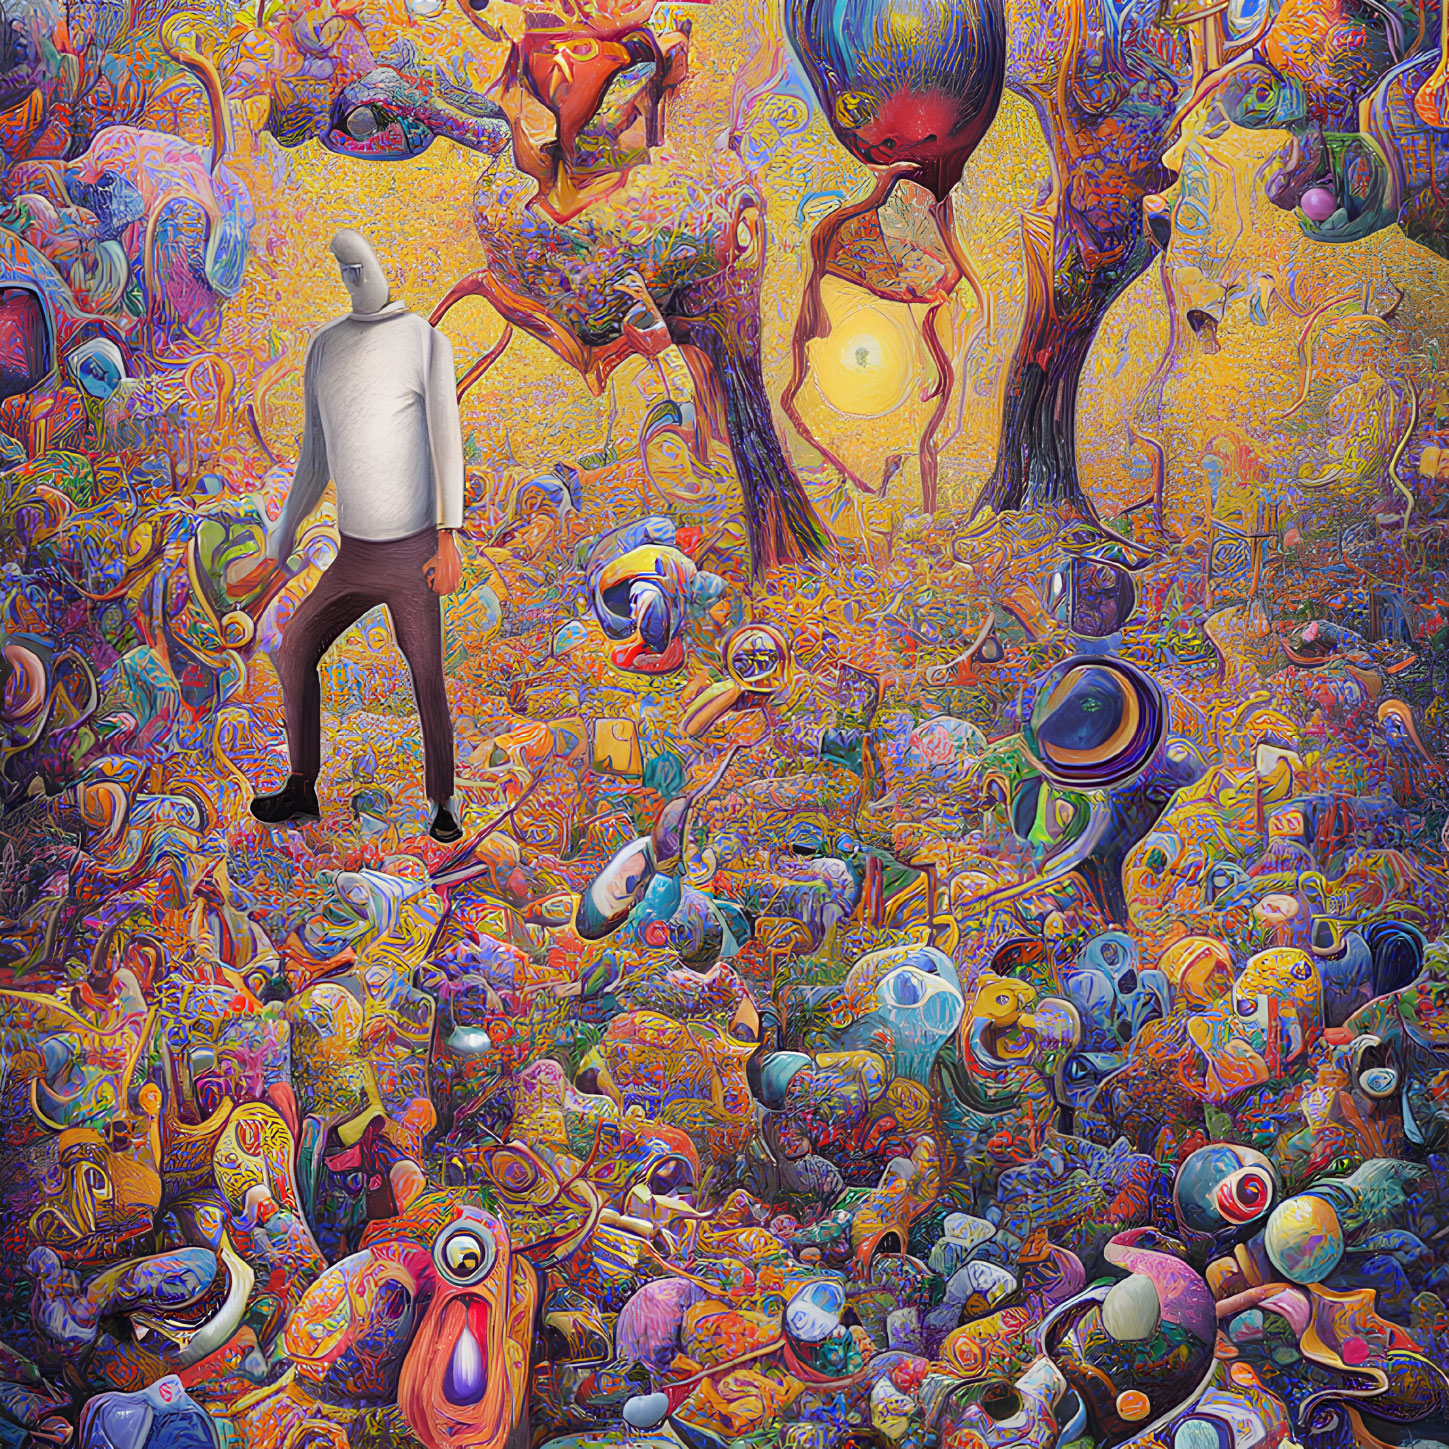 Vibrant surreal landscape with eye-like forms, trees, and figure in hoodie